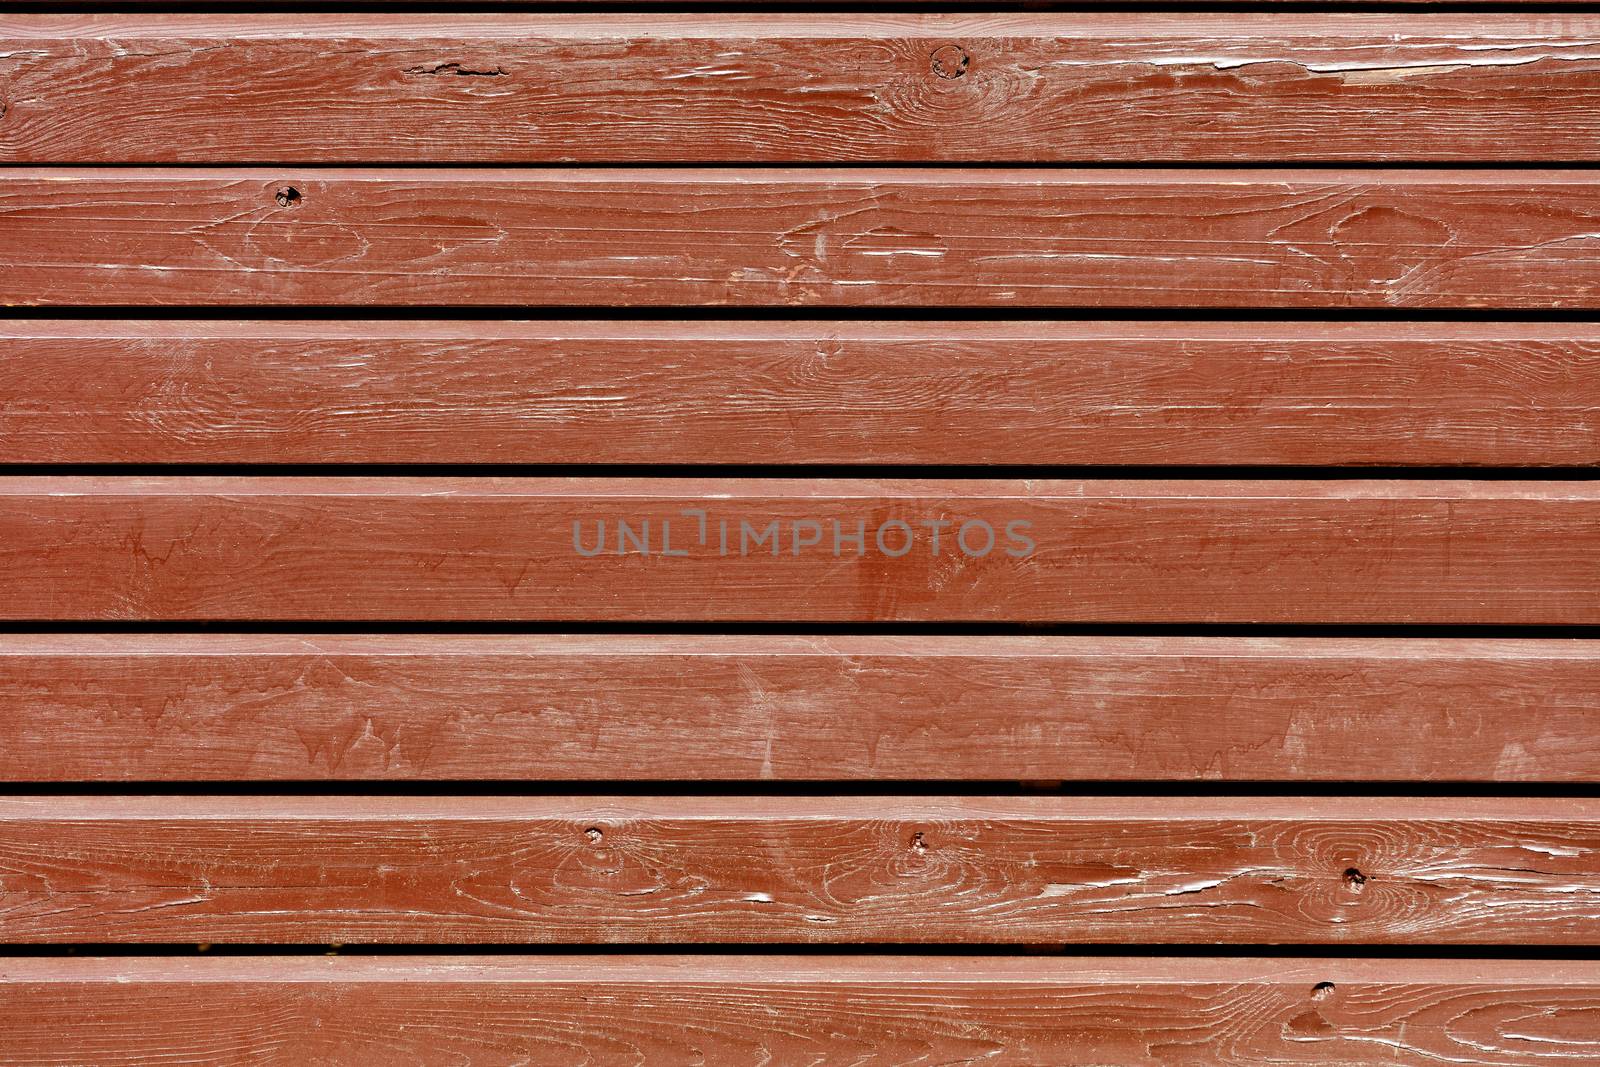 Brown old paint on an eroded shabby wooden horizontal wooden battens, texture of an old wood.